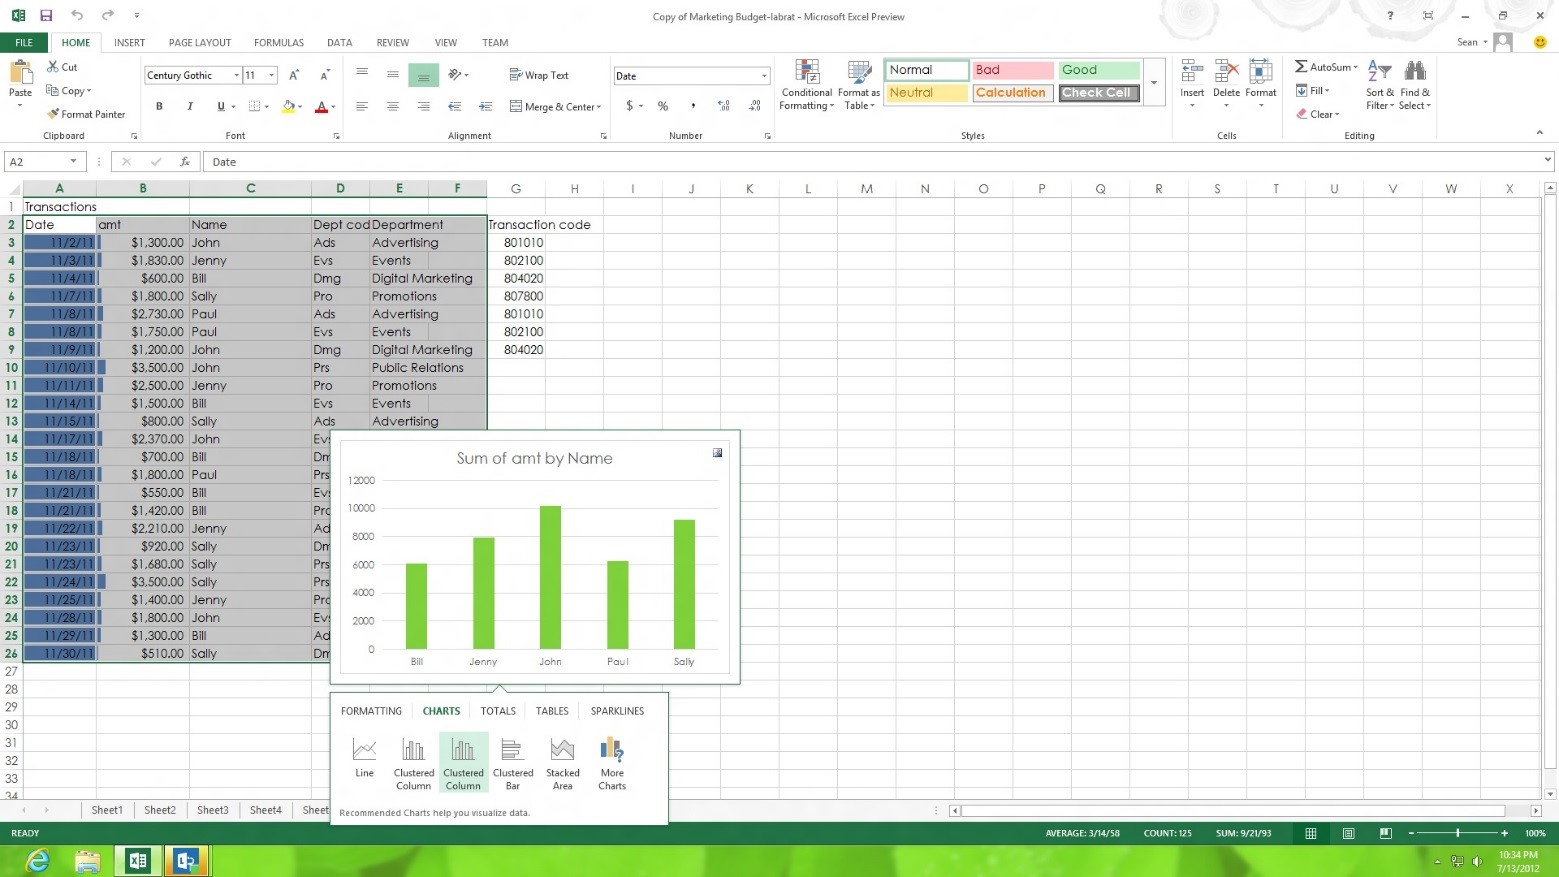 Getting rid of Excel in financial planning and budgeting: modern trend for CFOs